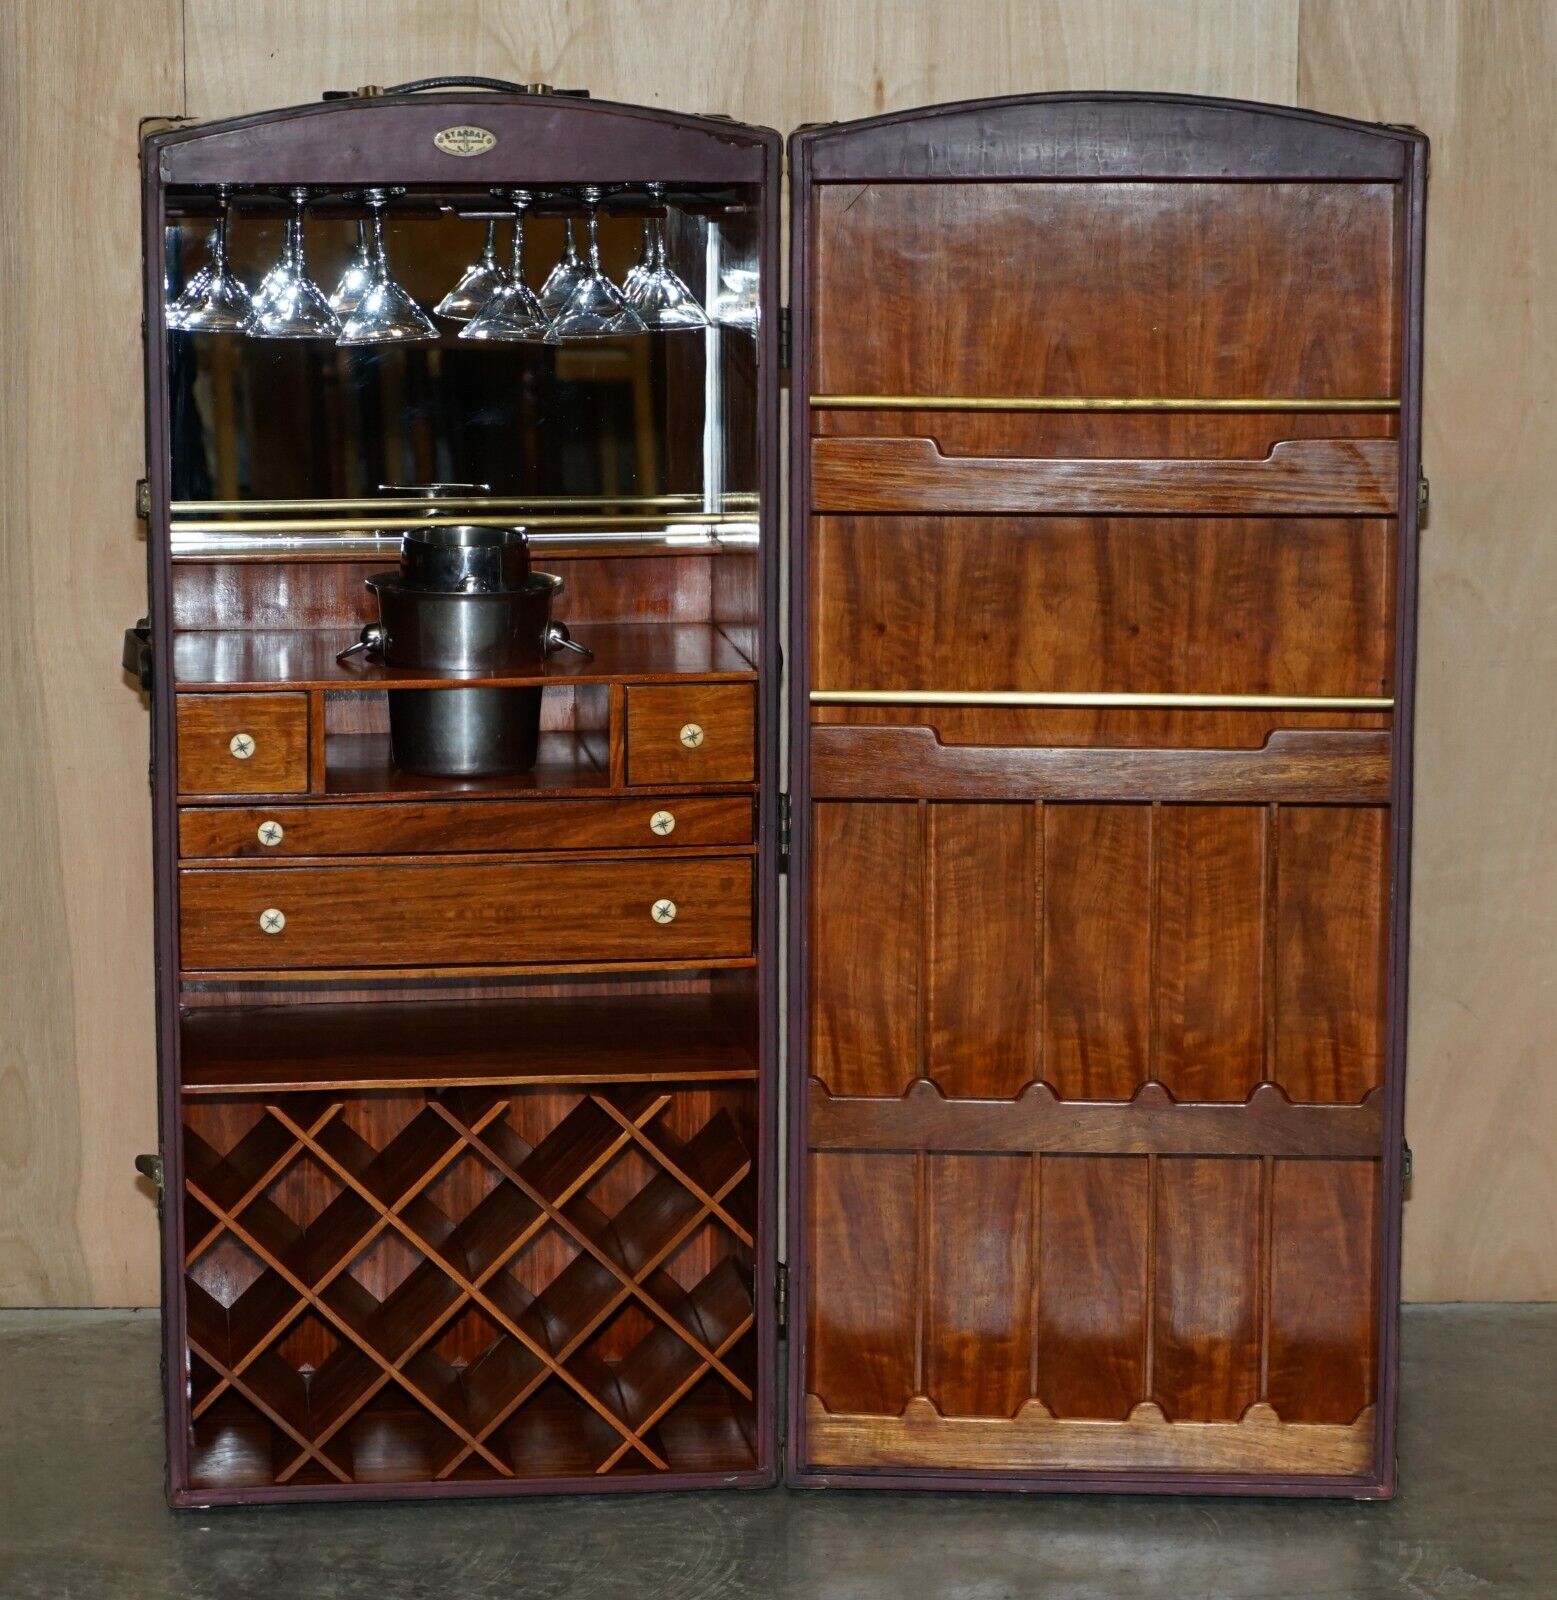 STARBAY SURCOUF LARGE STEAMER TRUNK AT HOME BAR WITH GLASSES CHAMPAGNE  BUCKET - Royal House Antiques